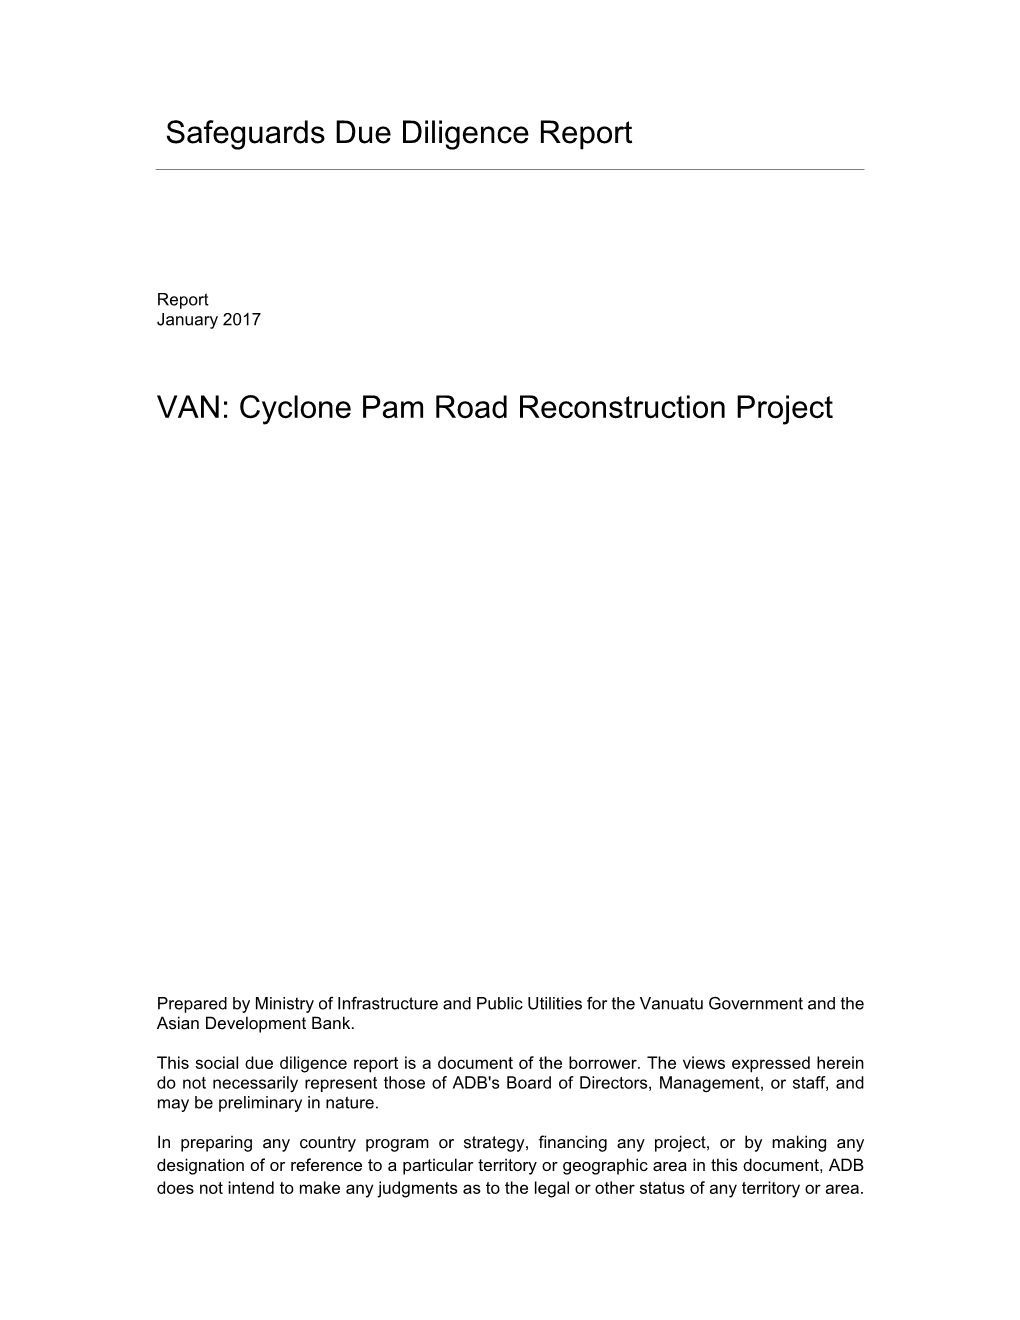 Cyclone Pam Road Reconstruction Project